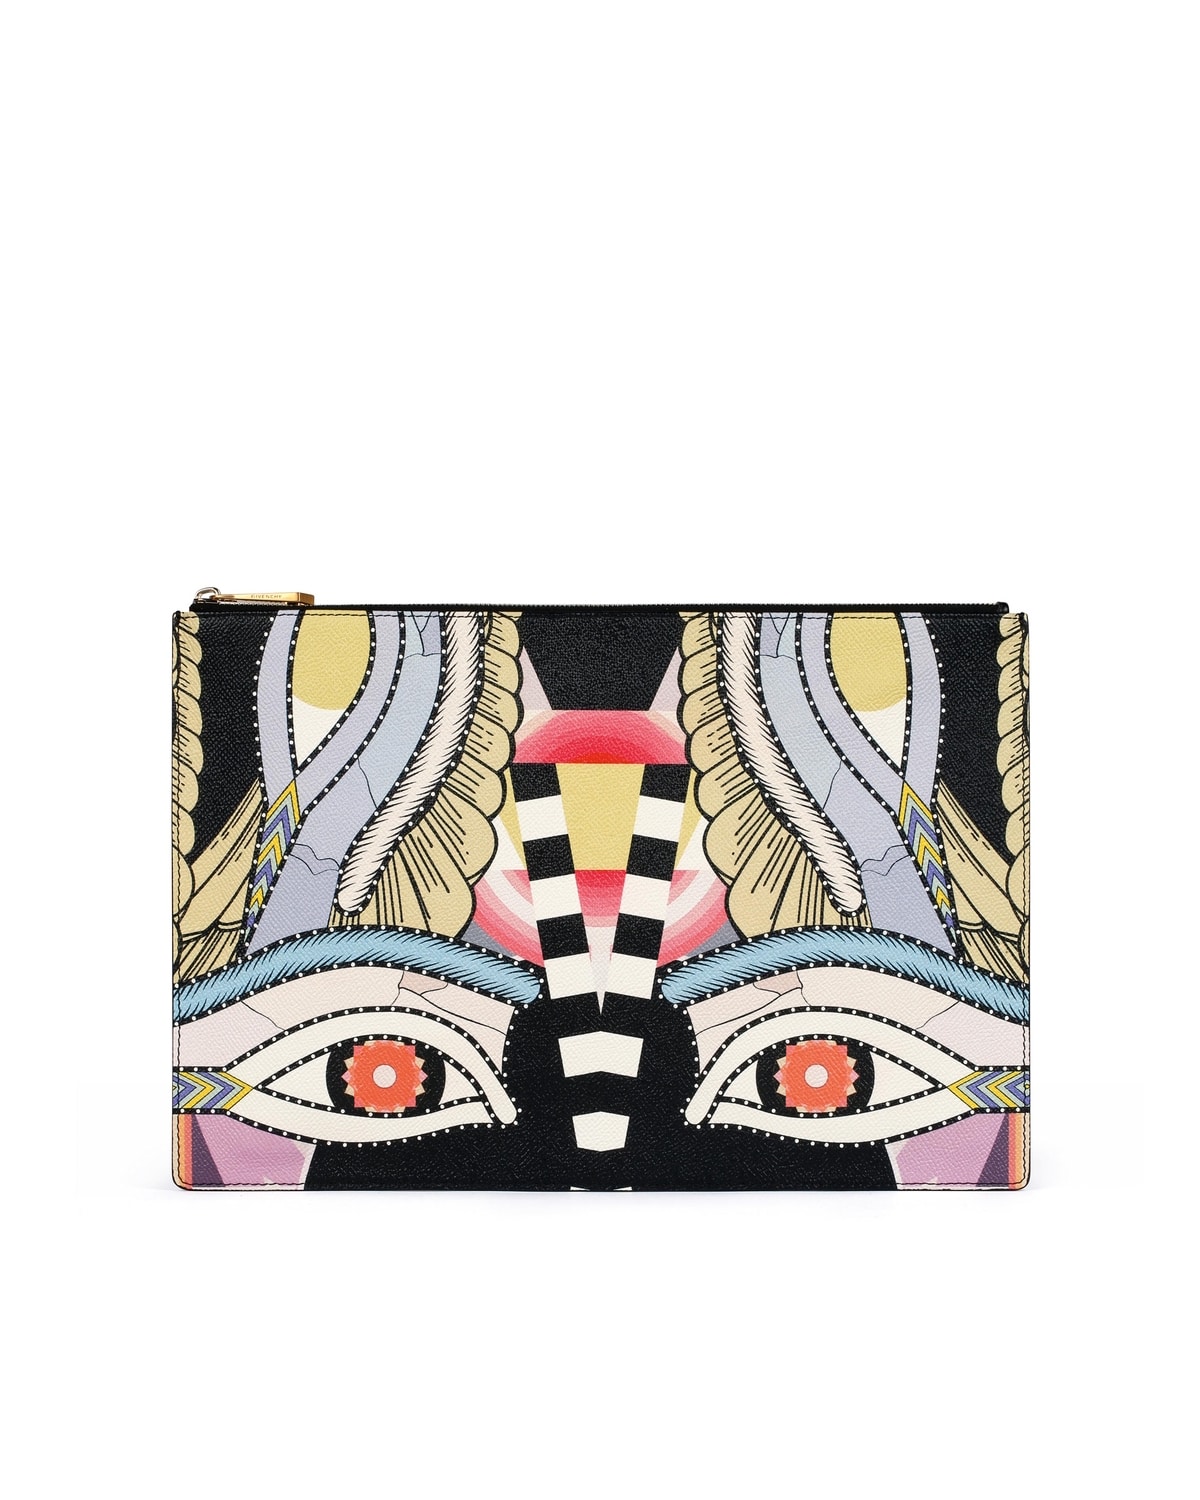 Givenchy Egyptian Print Collection For Fall/Winter 2016 - Spotted Fashion